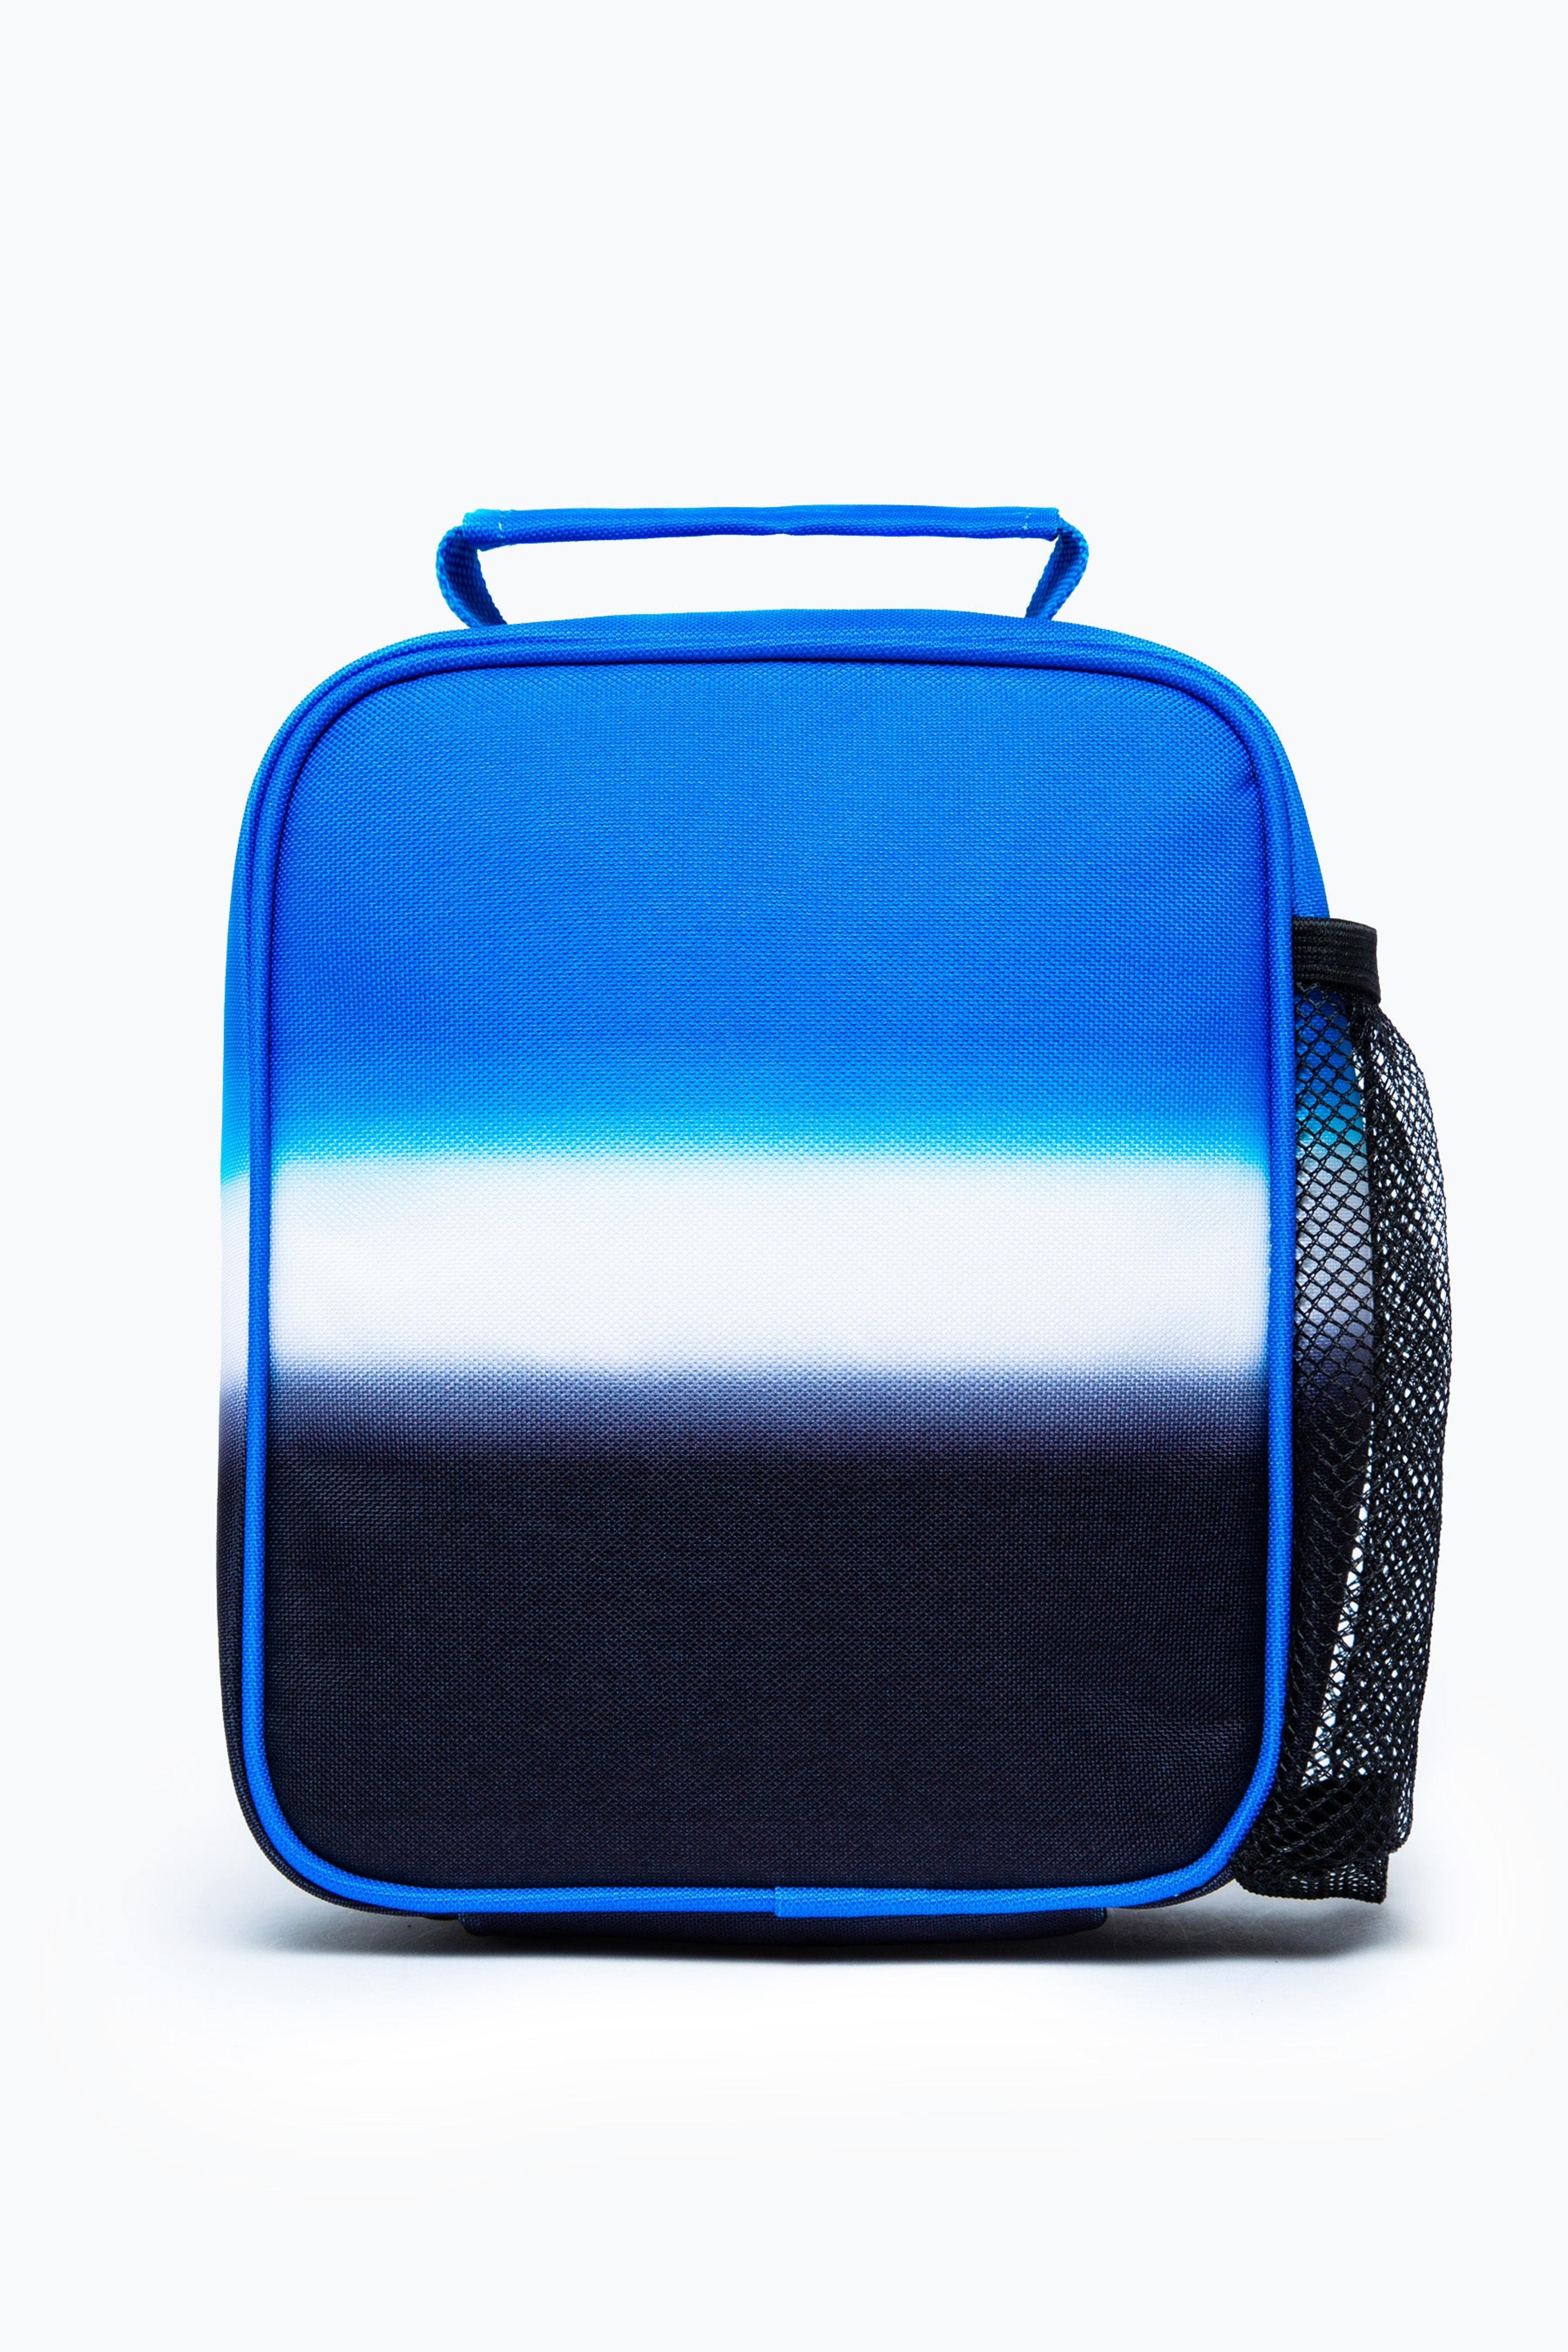 Alternate View 1 of HYPE BLUE BLACK FADE LUNCH BAG